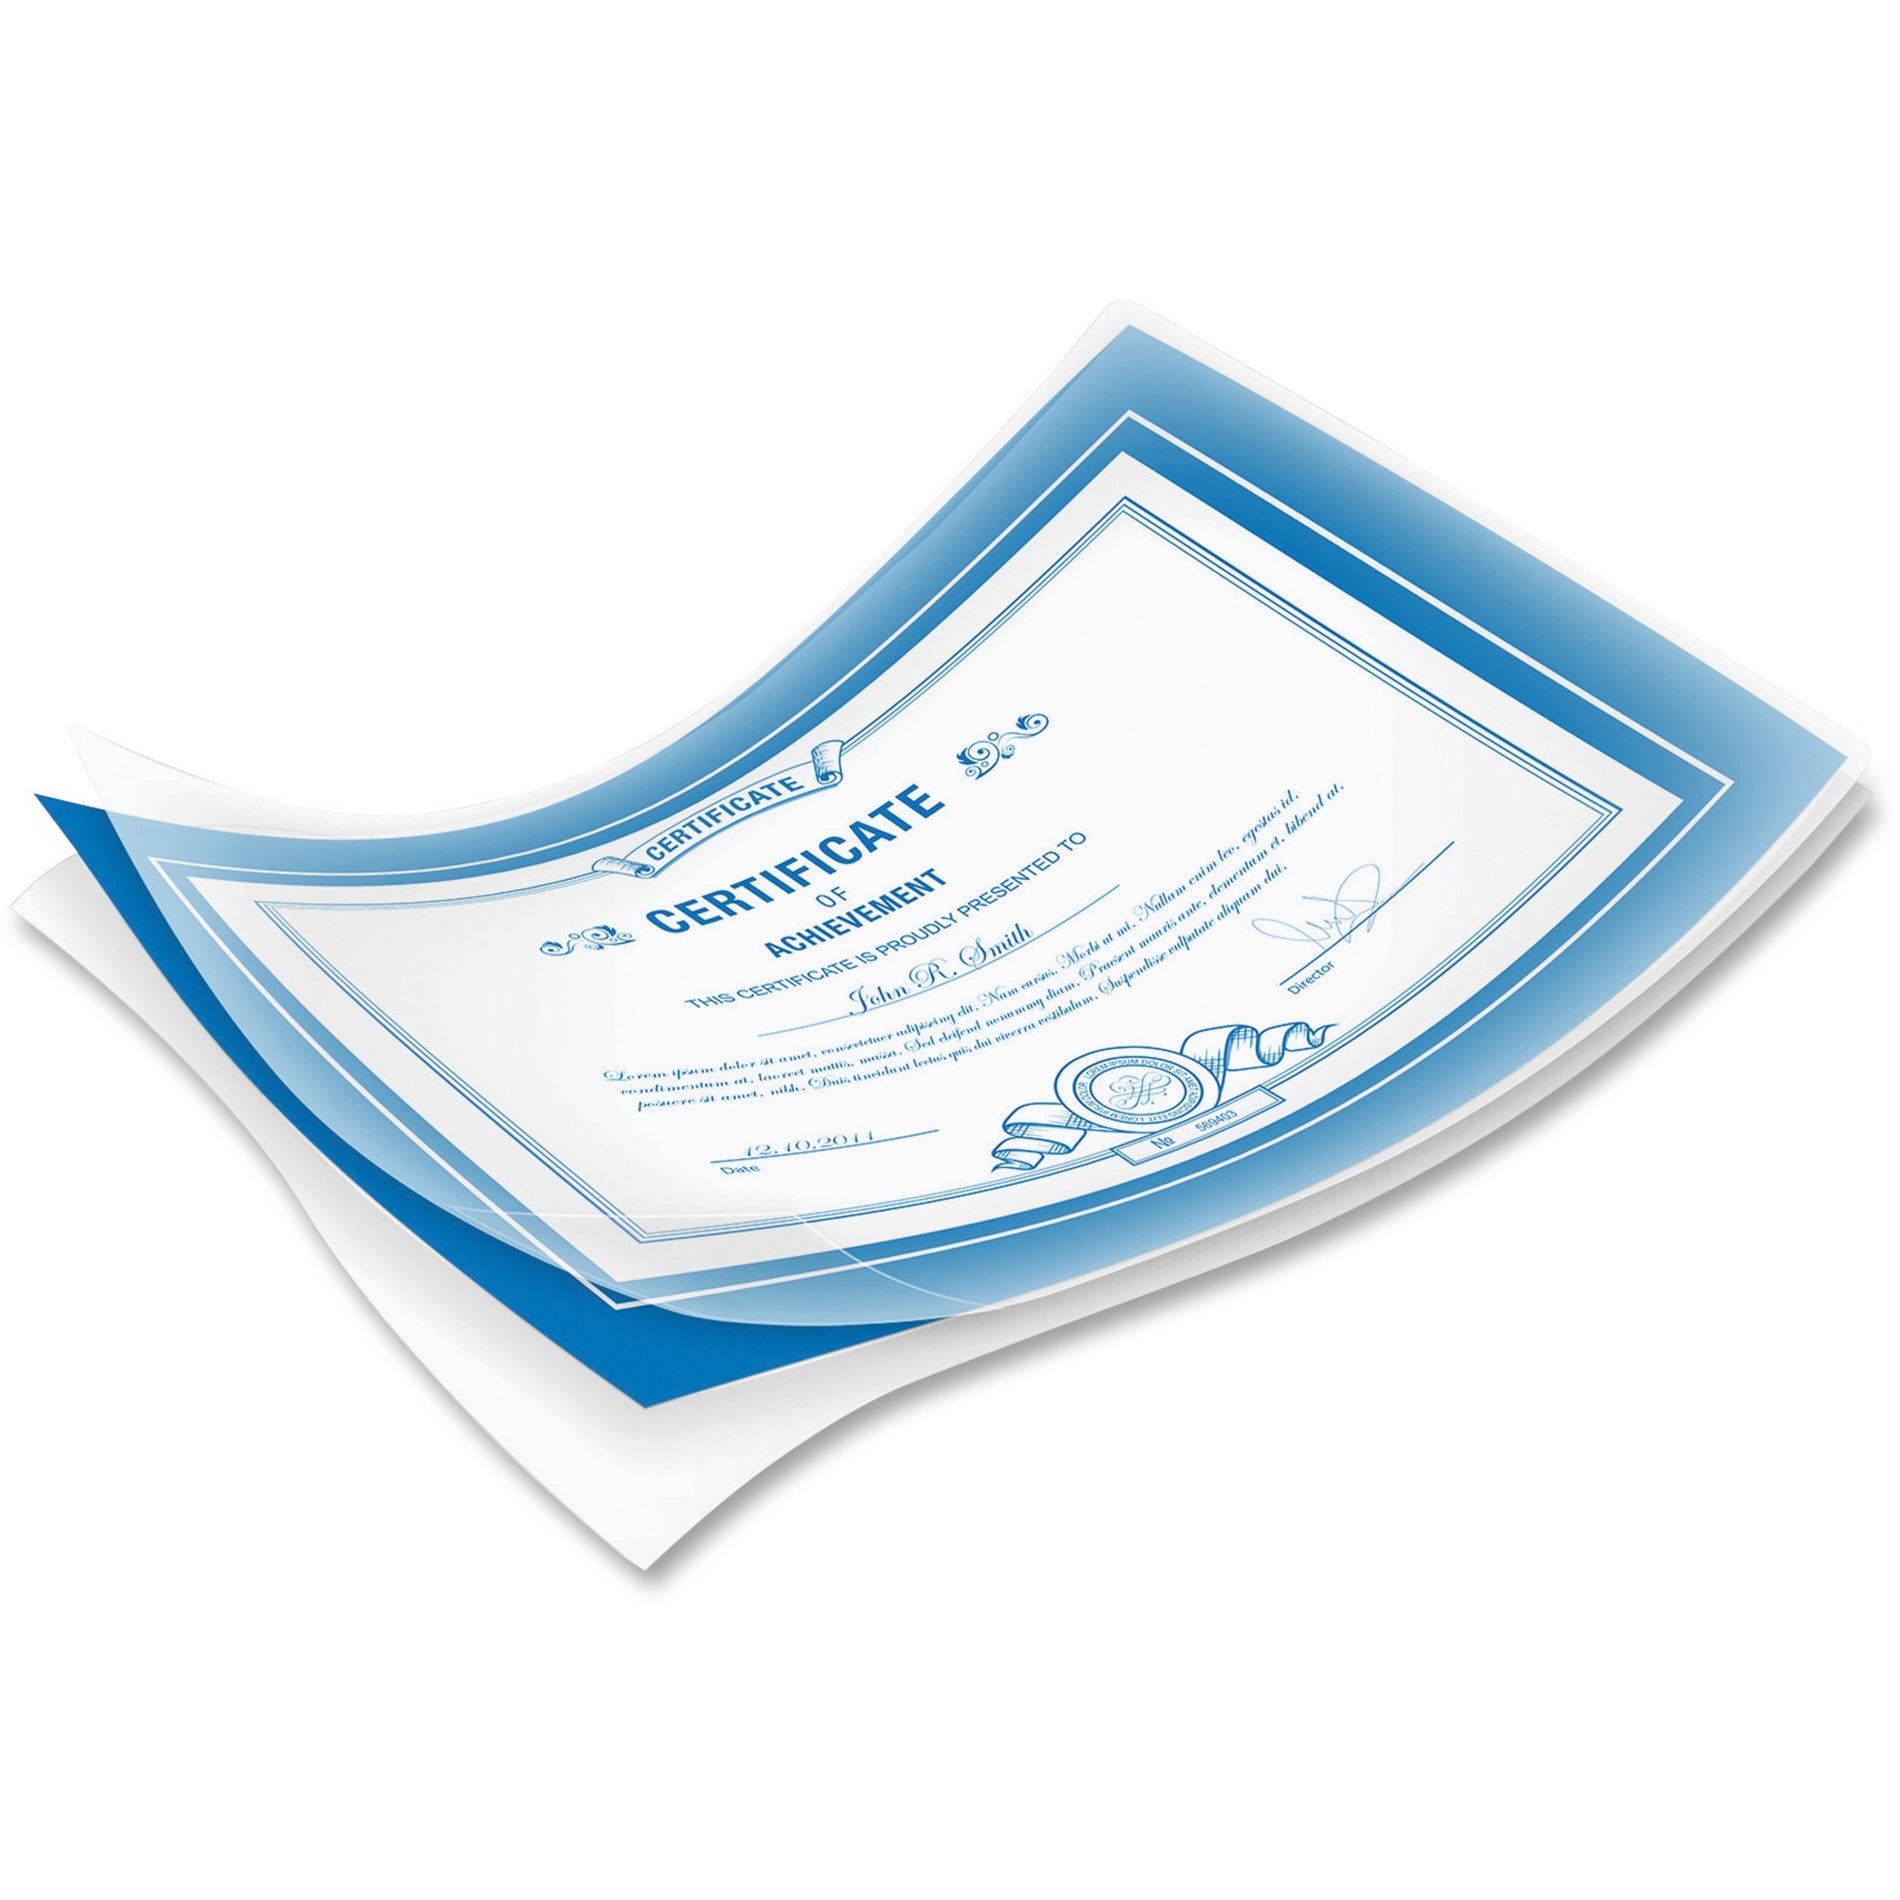 Fellowes 52041 Letter-Size Glossy Laminating Pouches, Durable, Clear, 7 mil Thickness